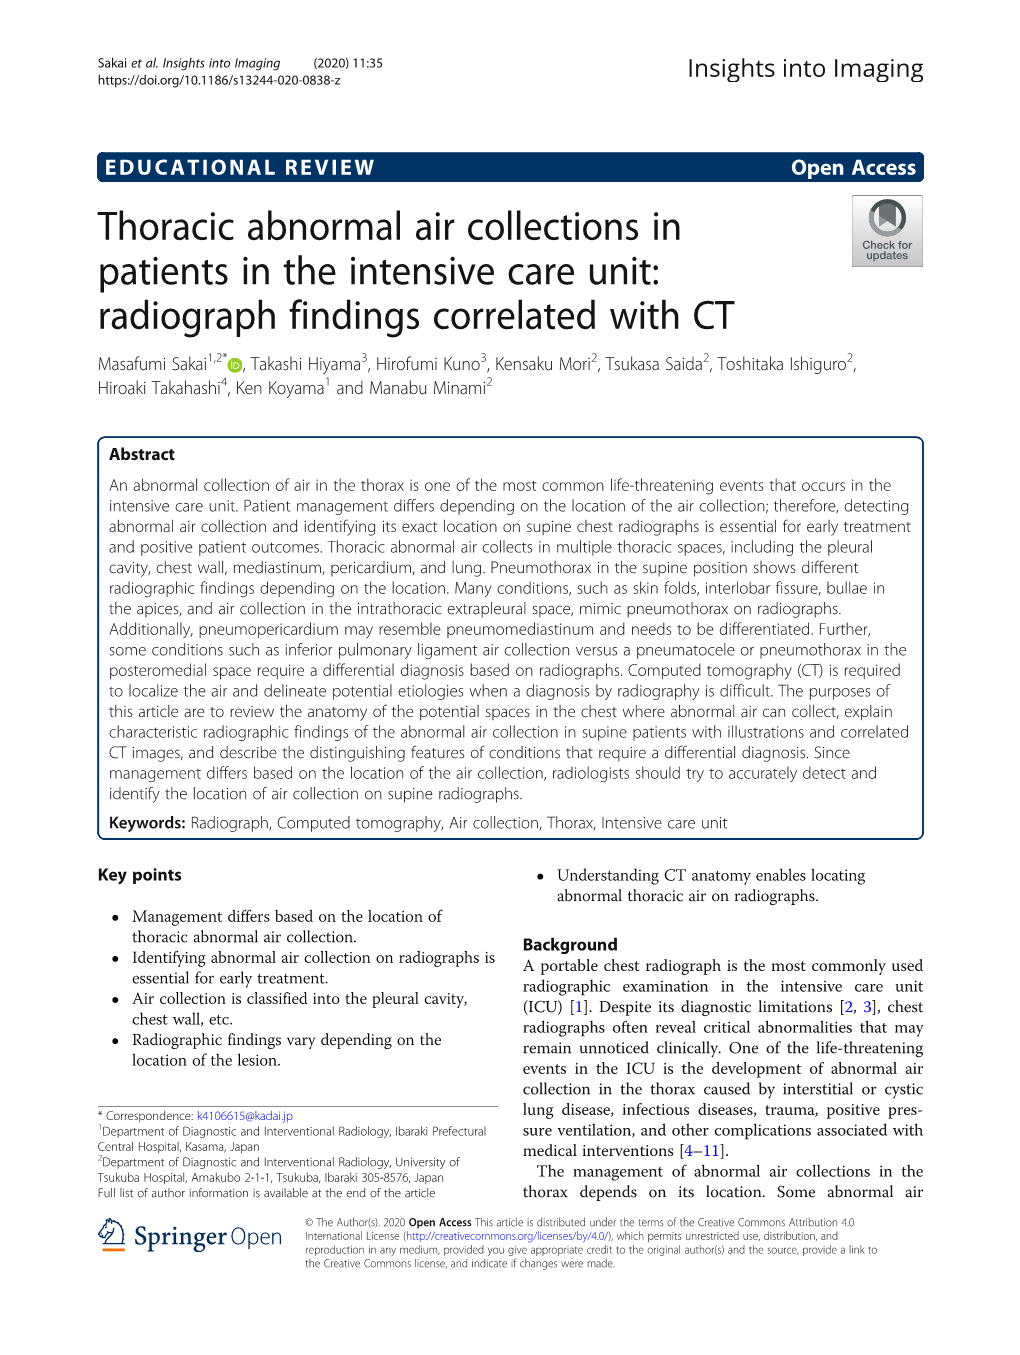 Thoracic Abnormal Air Collections in Patients in the Intensive Care Unit